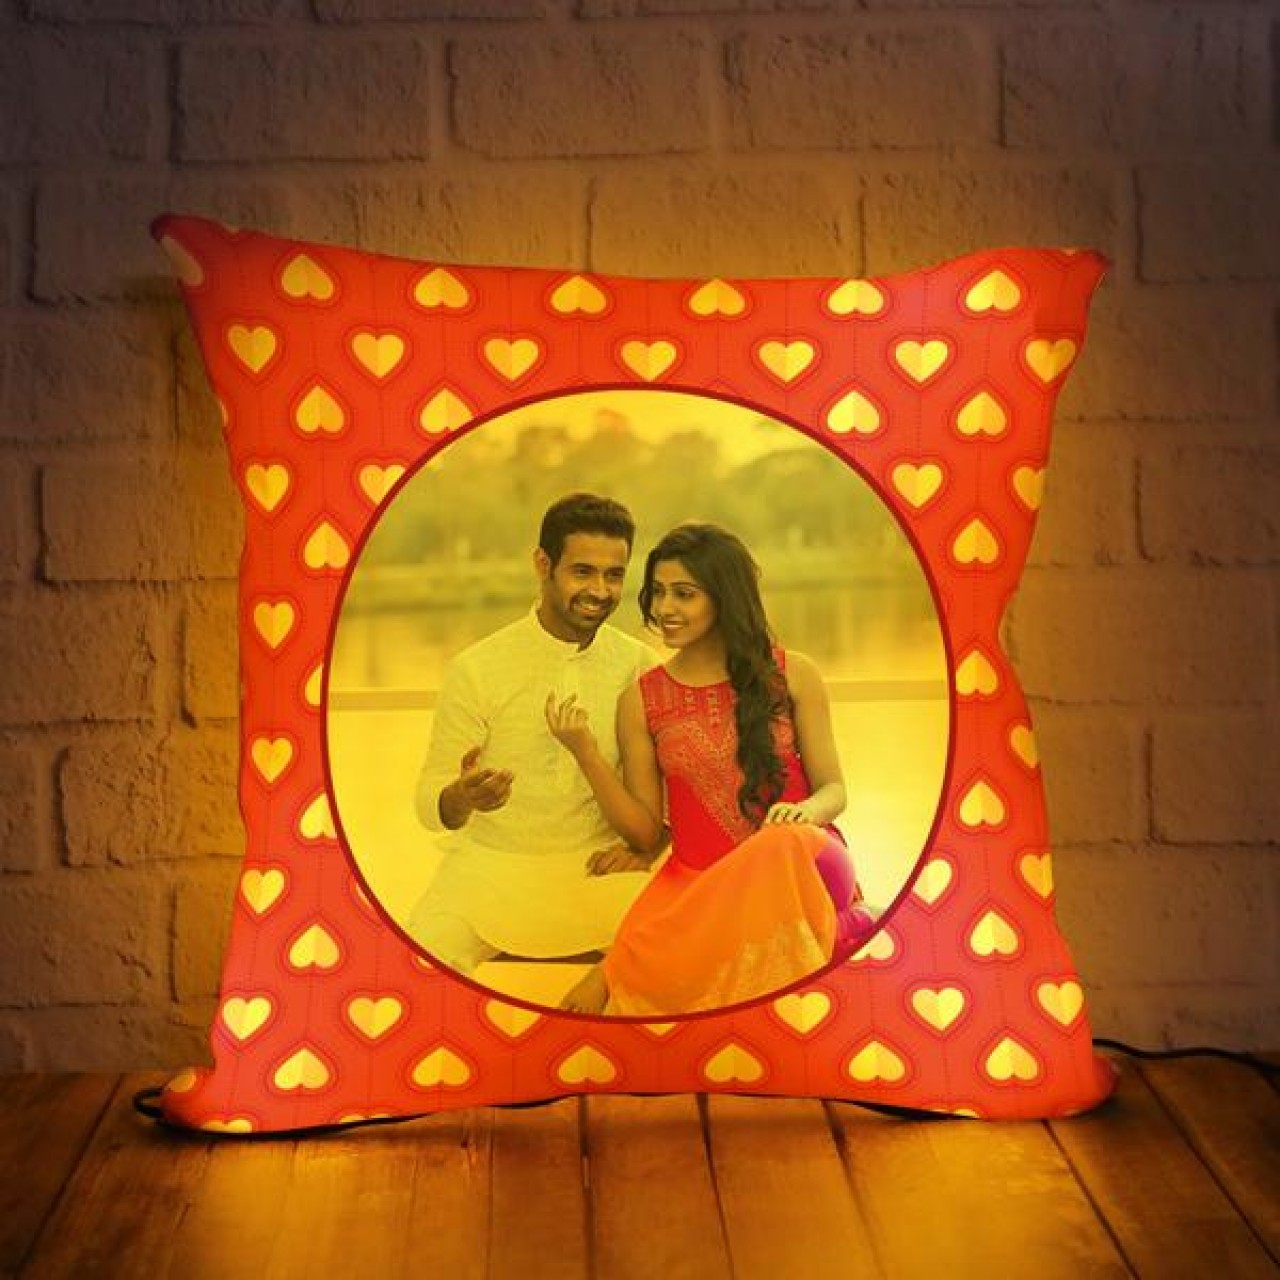 Personalized Led Cushion with Heart Pattern in Background